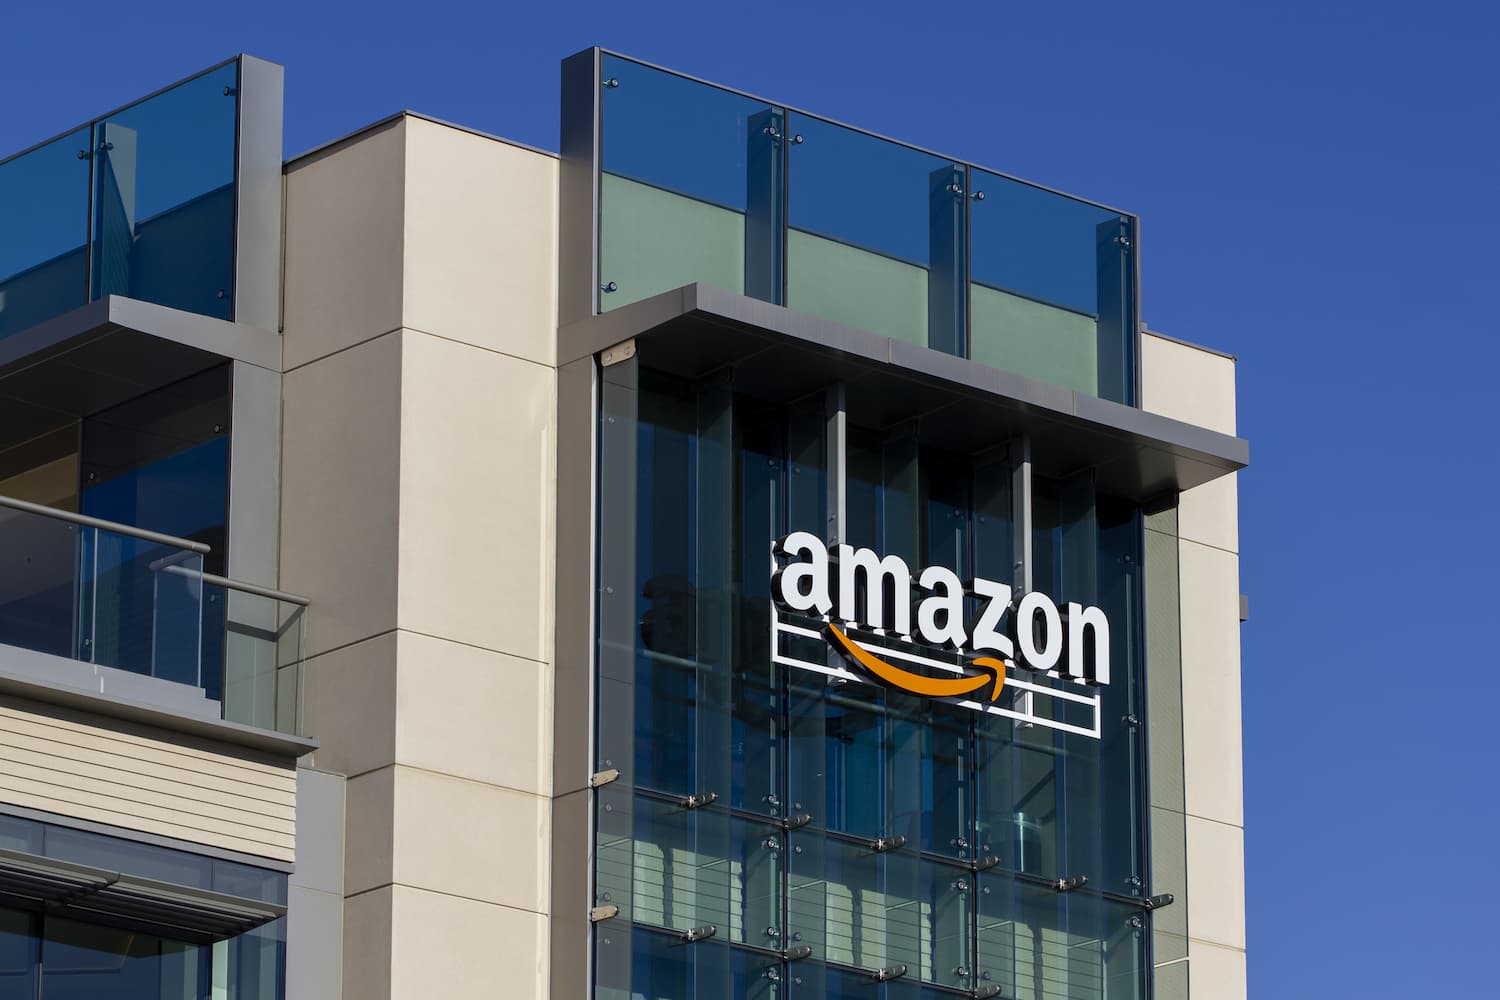 Amazon Care Plans to Expand into 20 More Cities in 2022